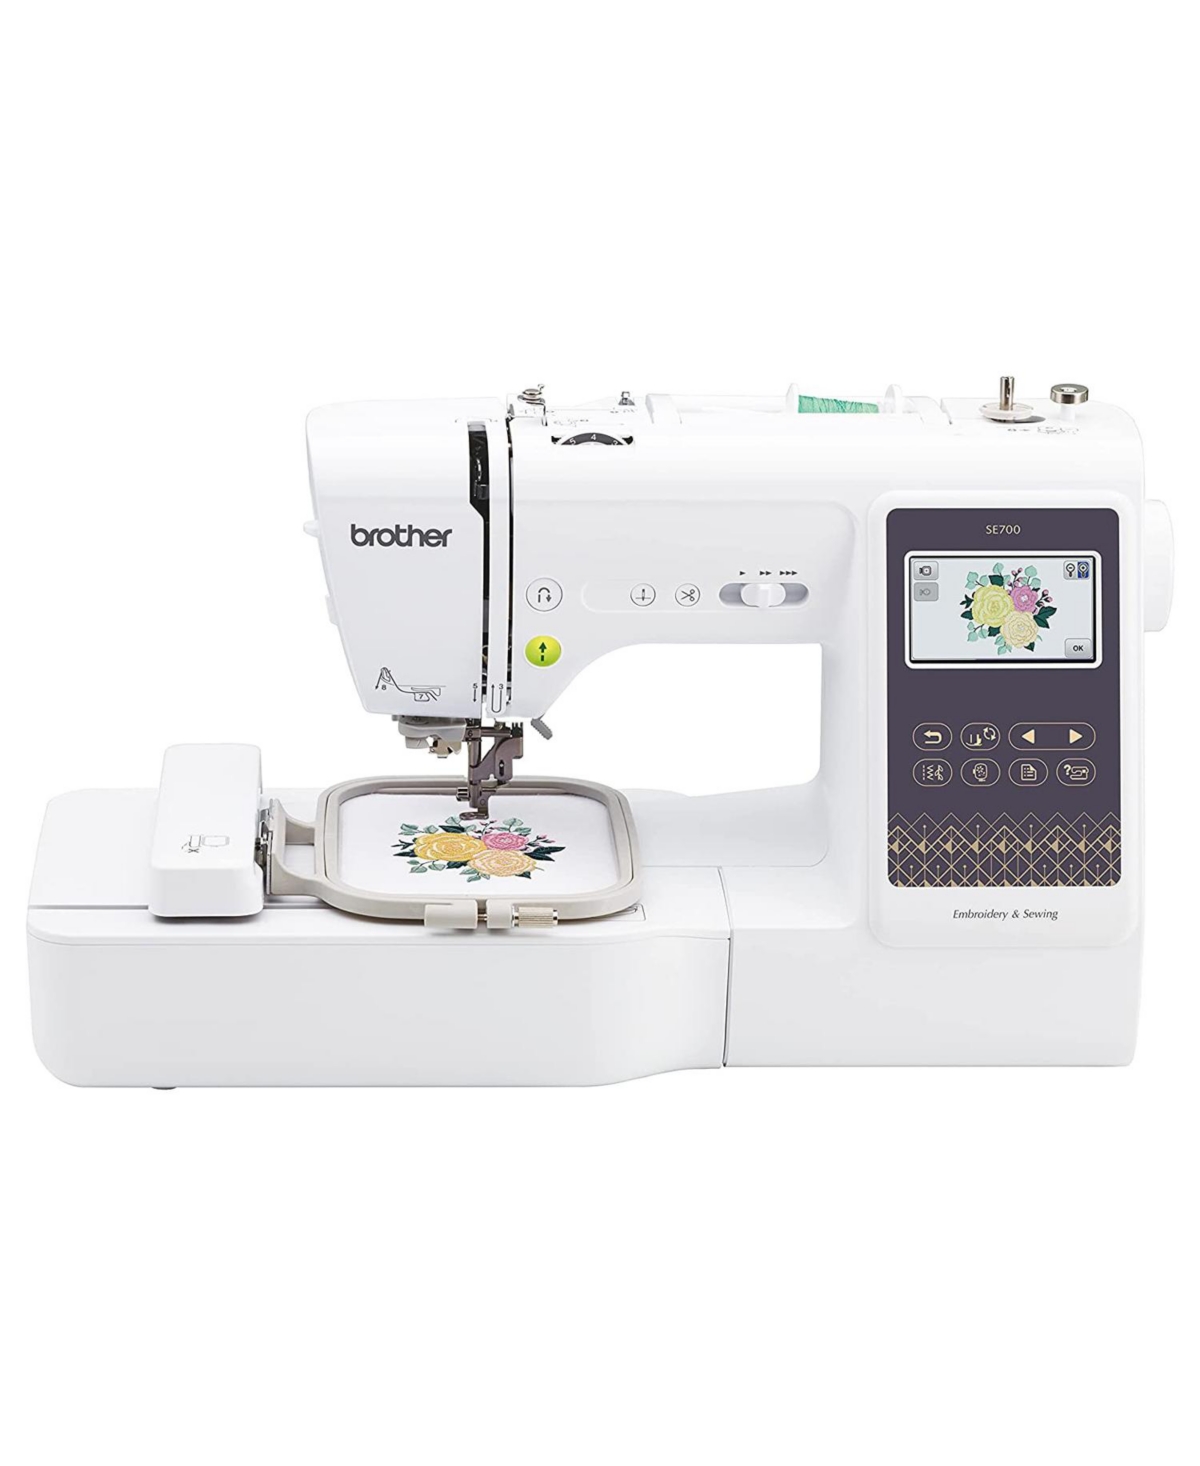 SE700 4" x 4" Computerized Sewing and Embroidery Machine - White